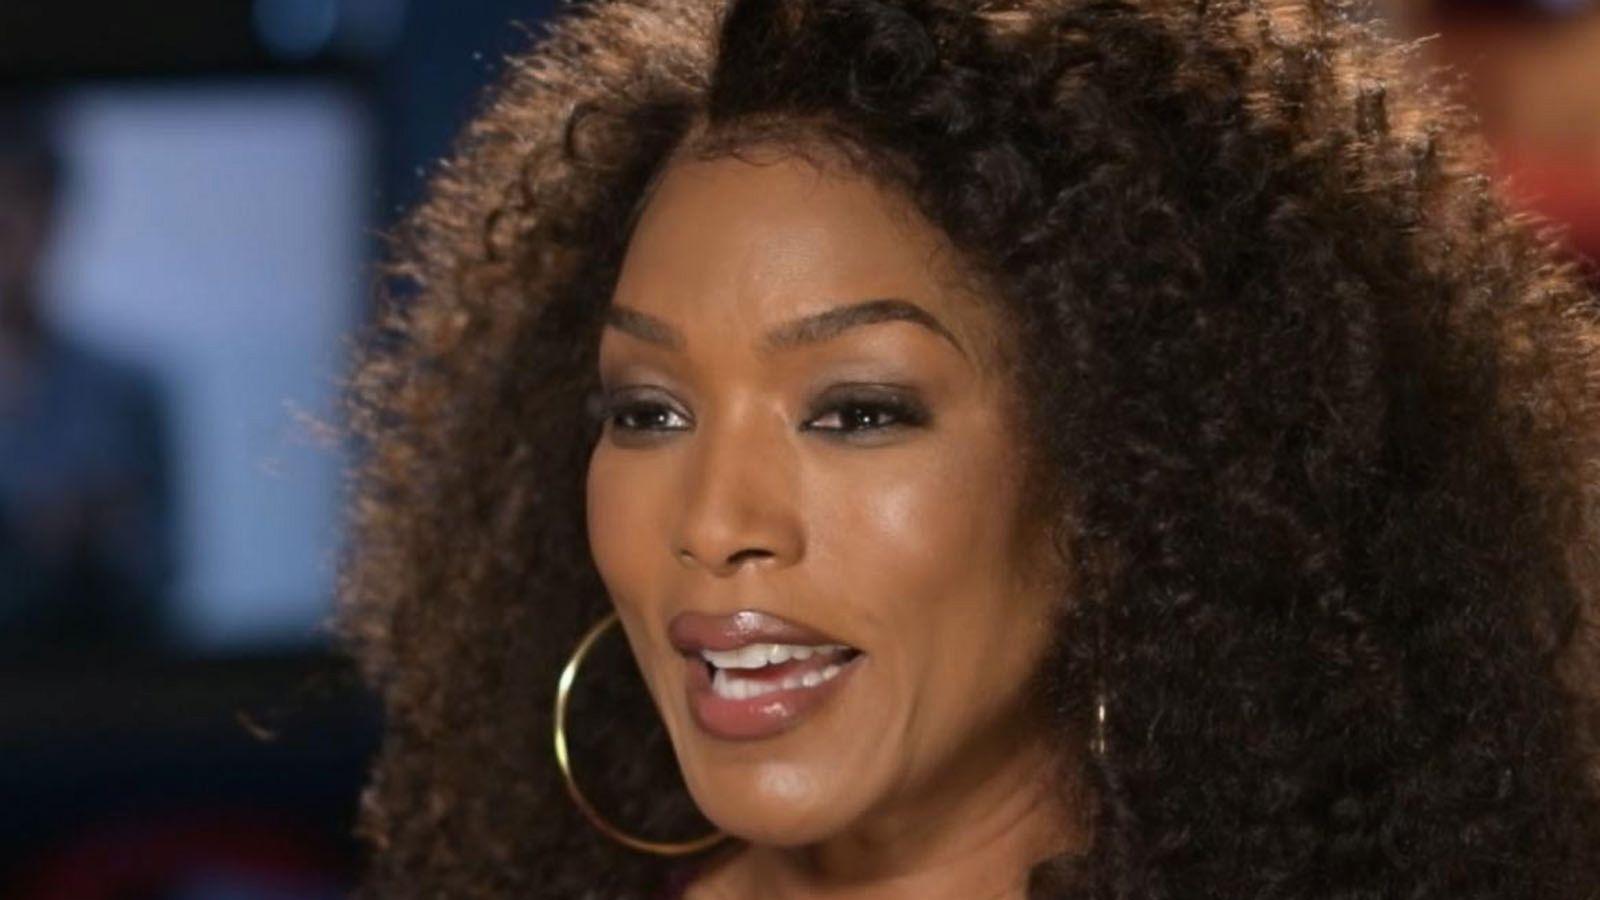 Angela Bassett on the success of 'Black Panther' and the #MeToo